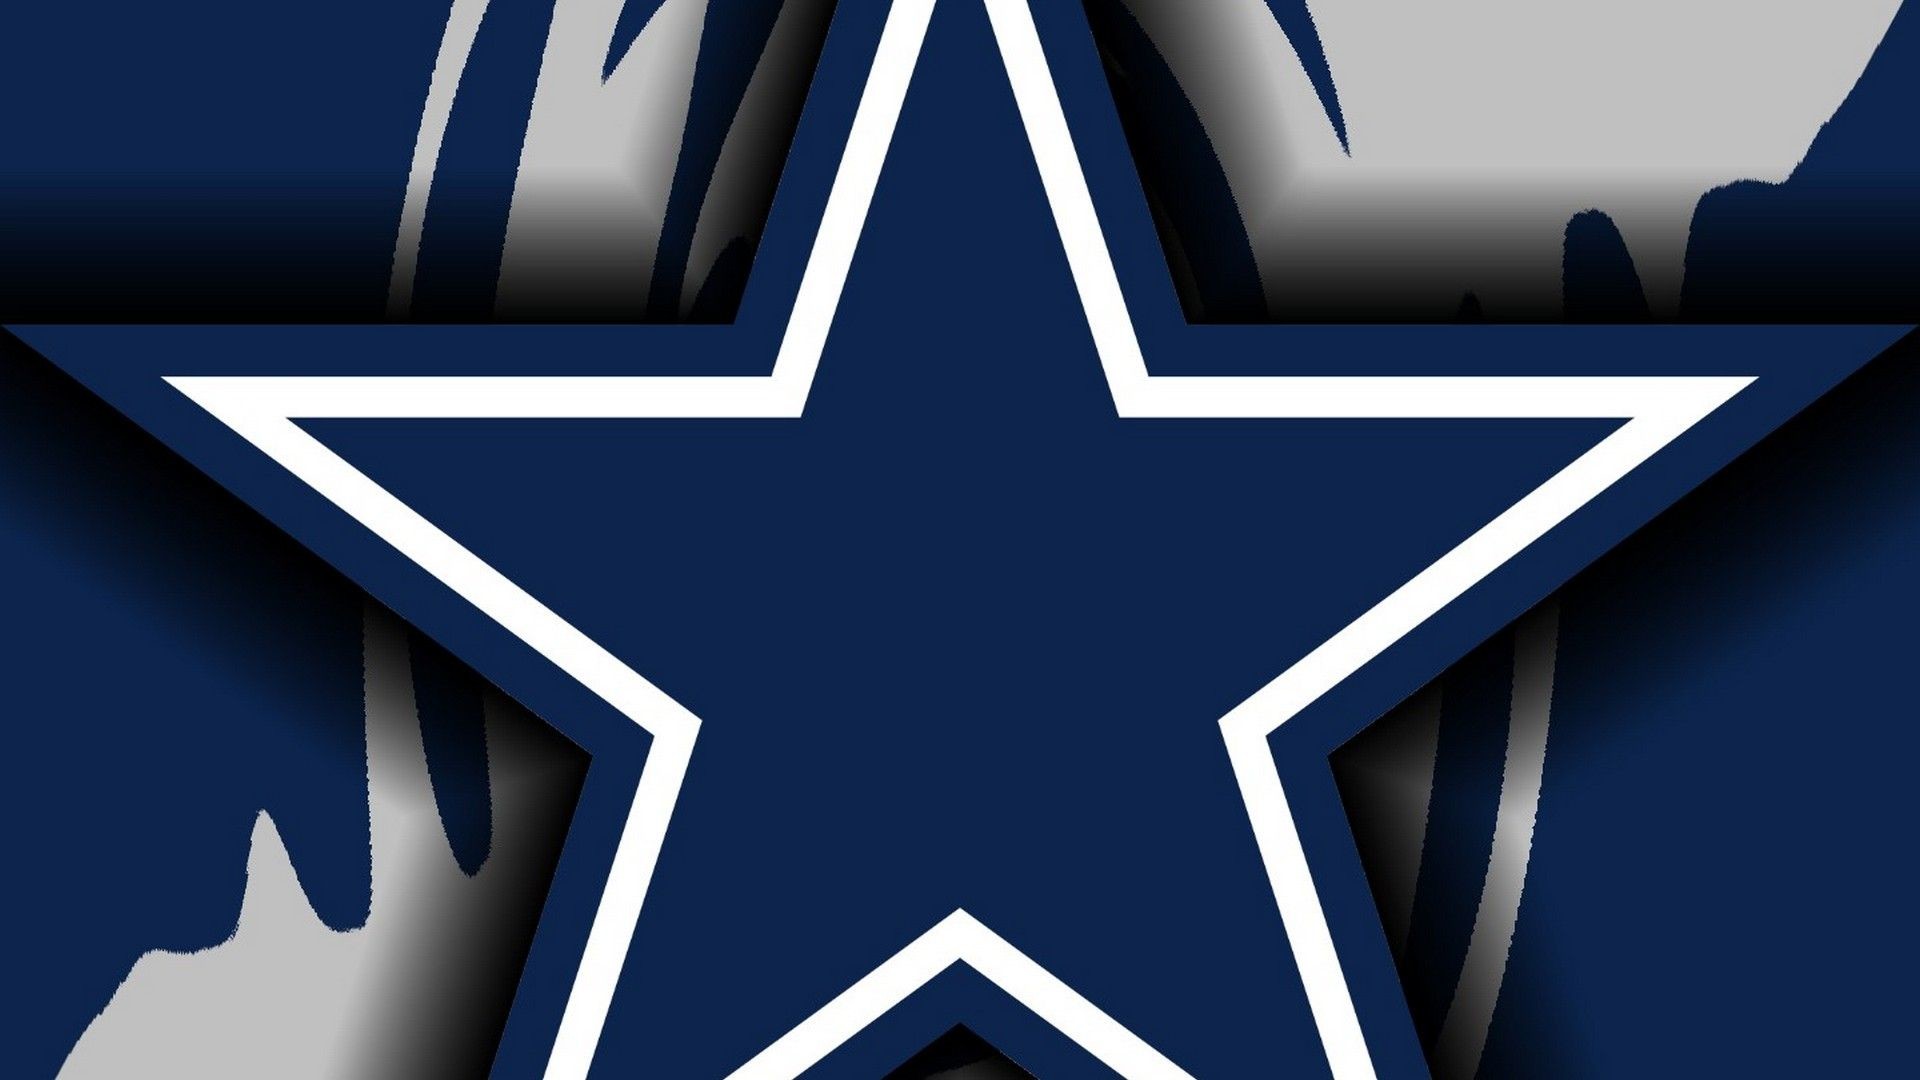 1920x1080 Wallpapers HD Dallas Cowboys | Best NFL Wallpapers